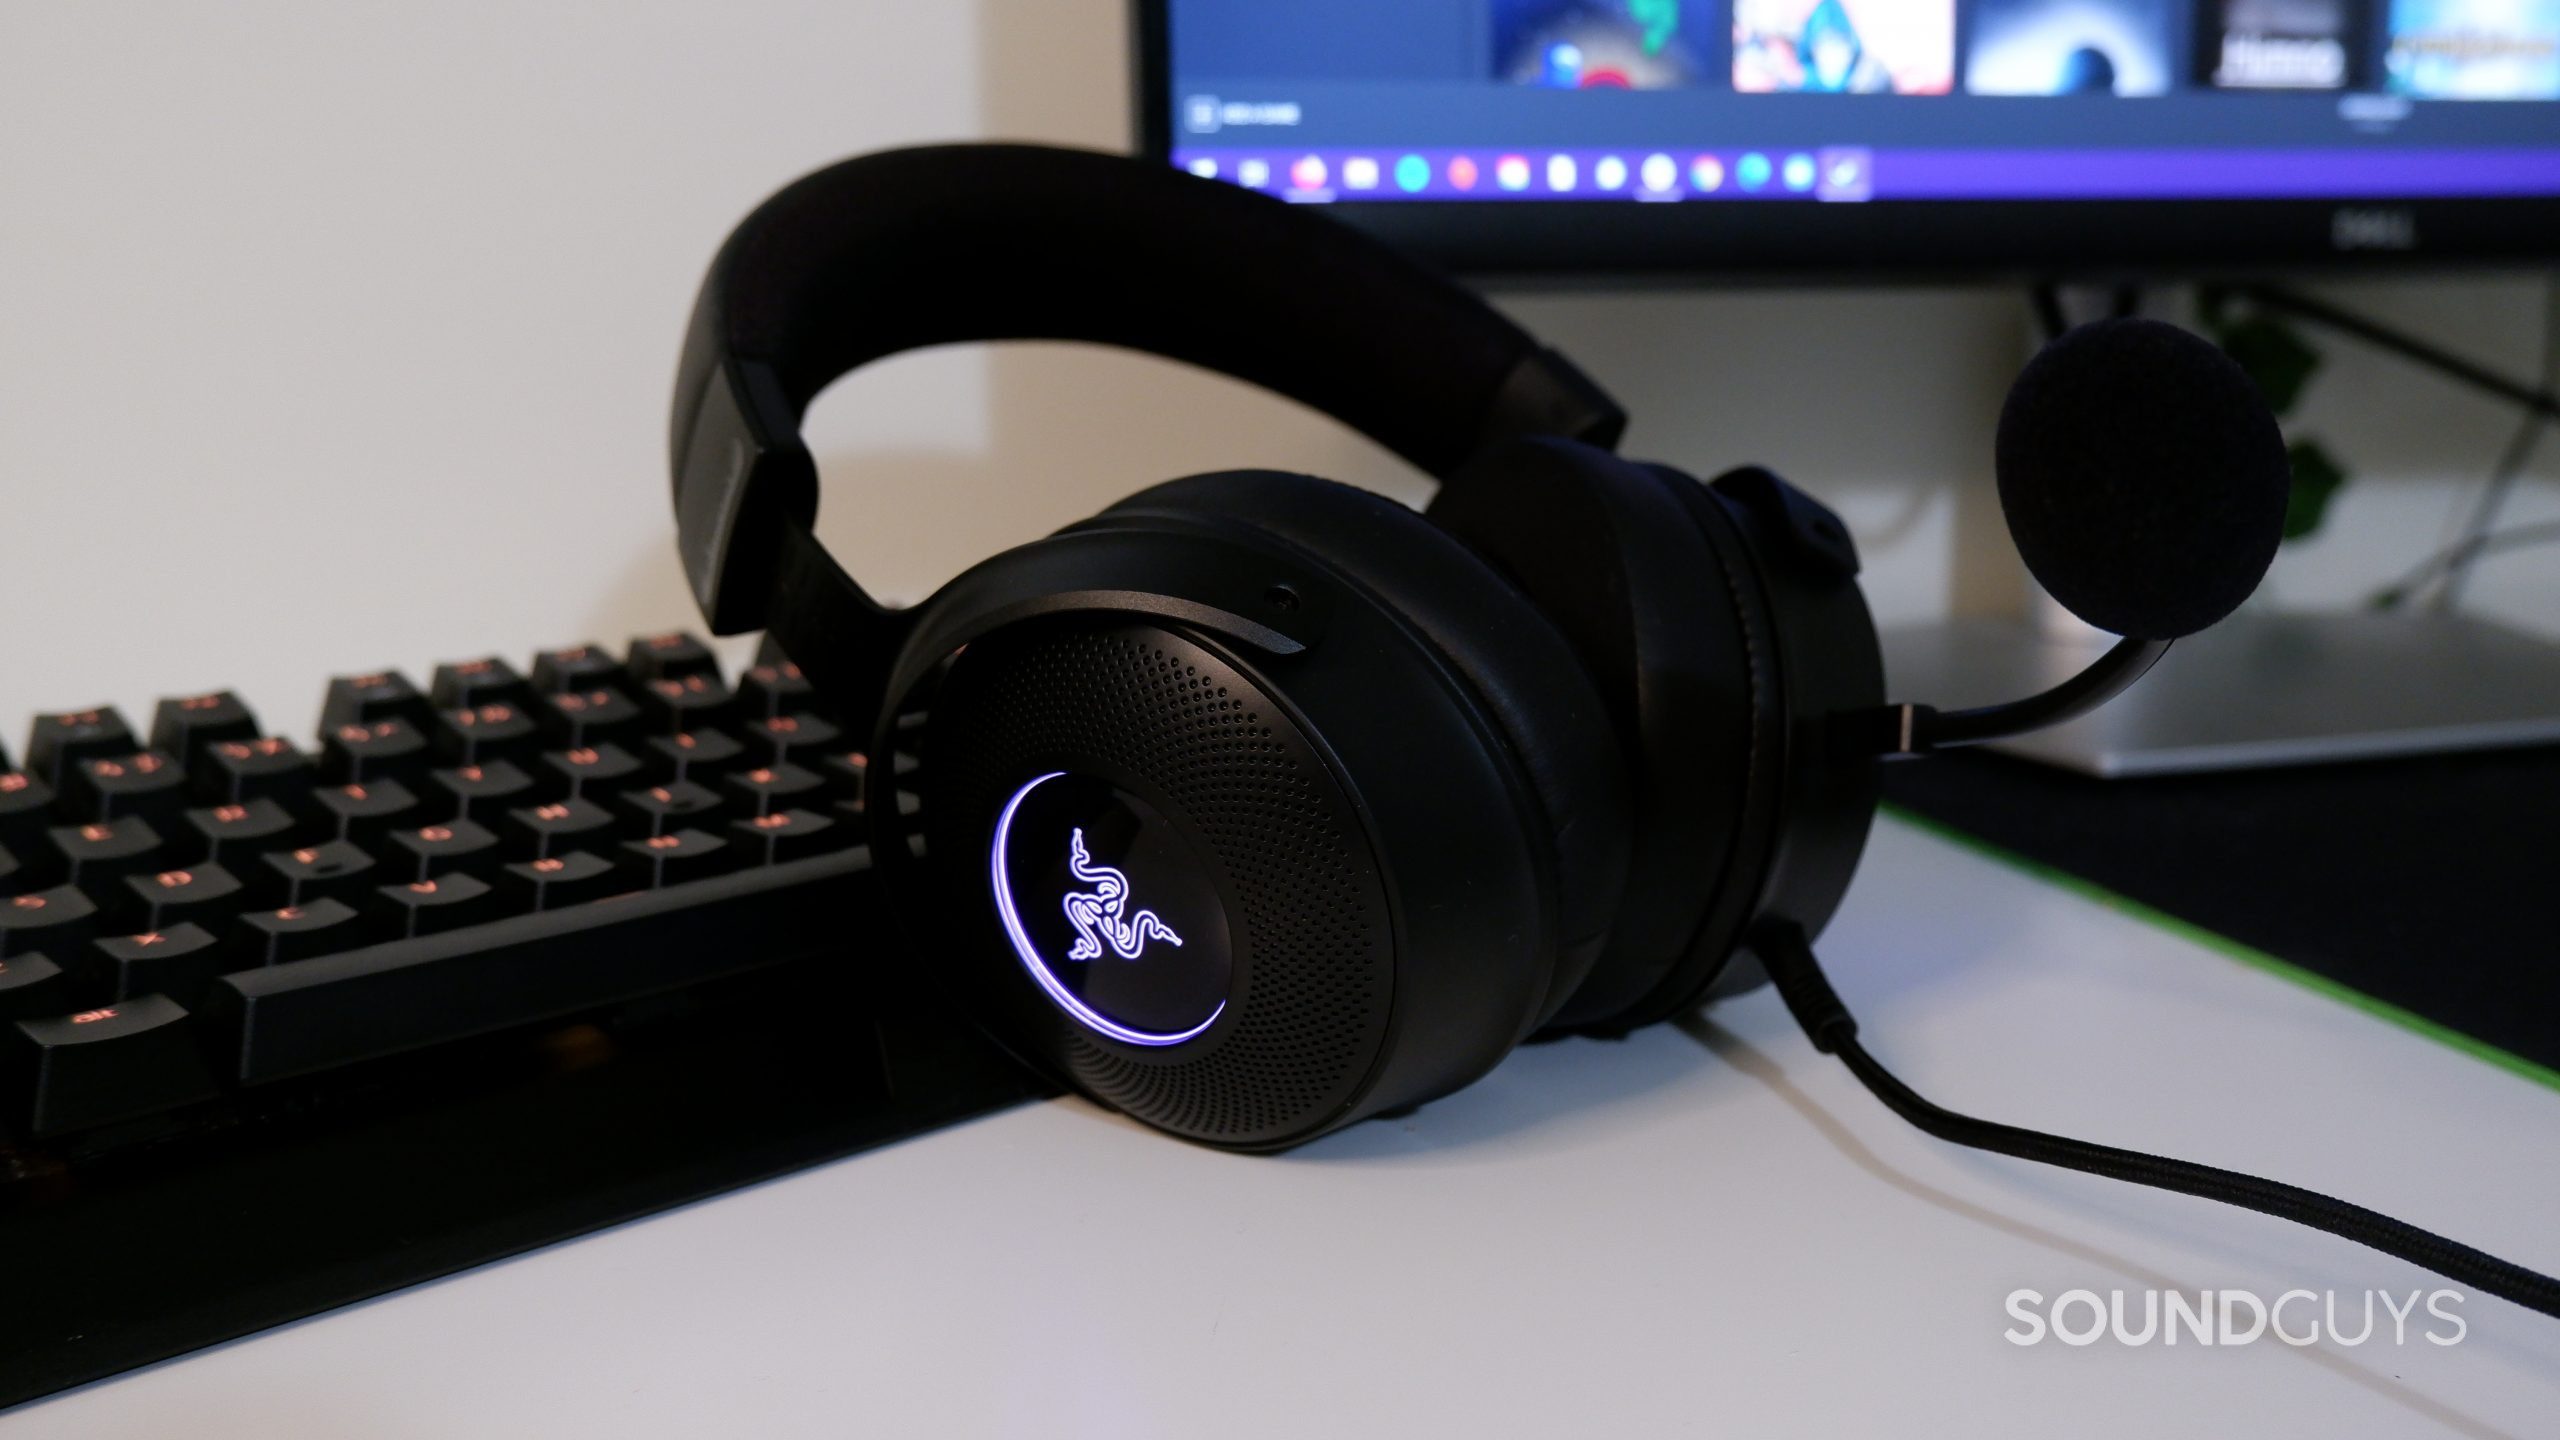 Razer Kraken V3 headset resting against a keyboard, with a computer screen in the background.